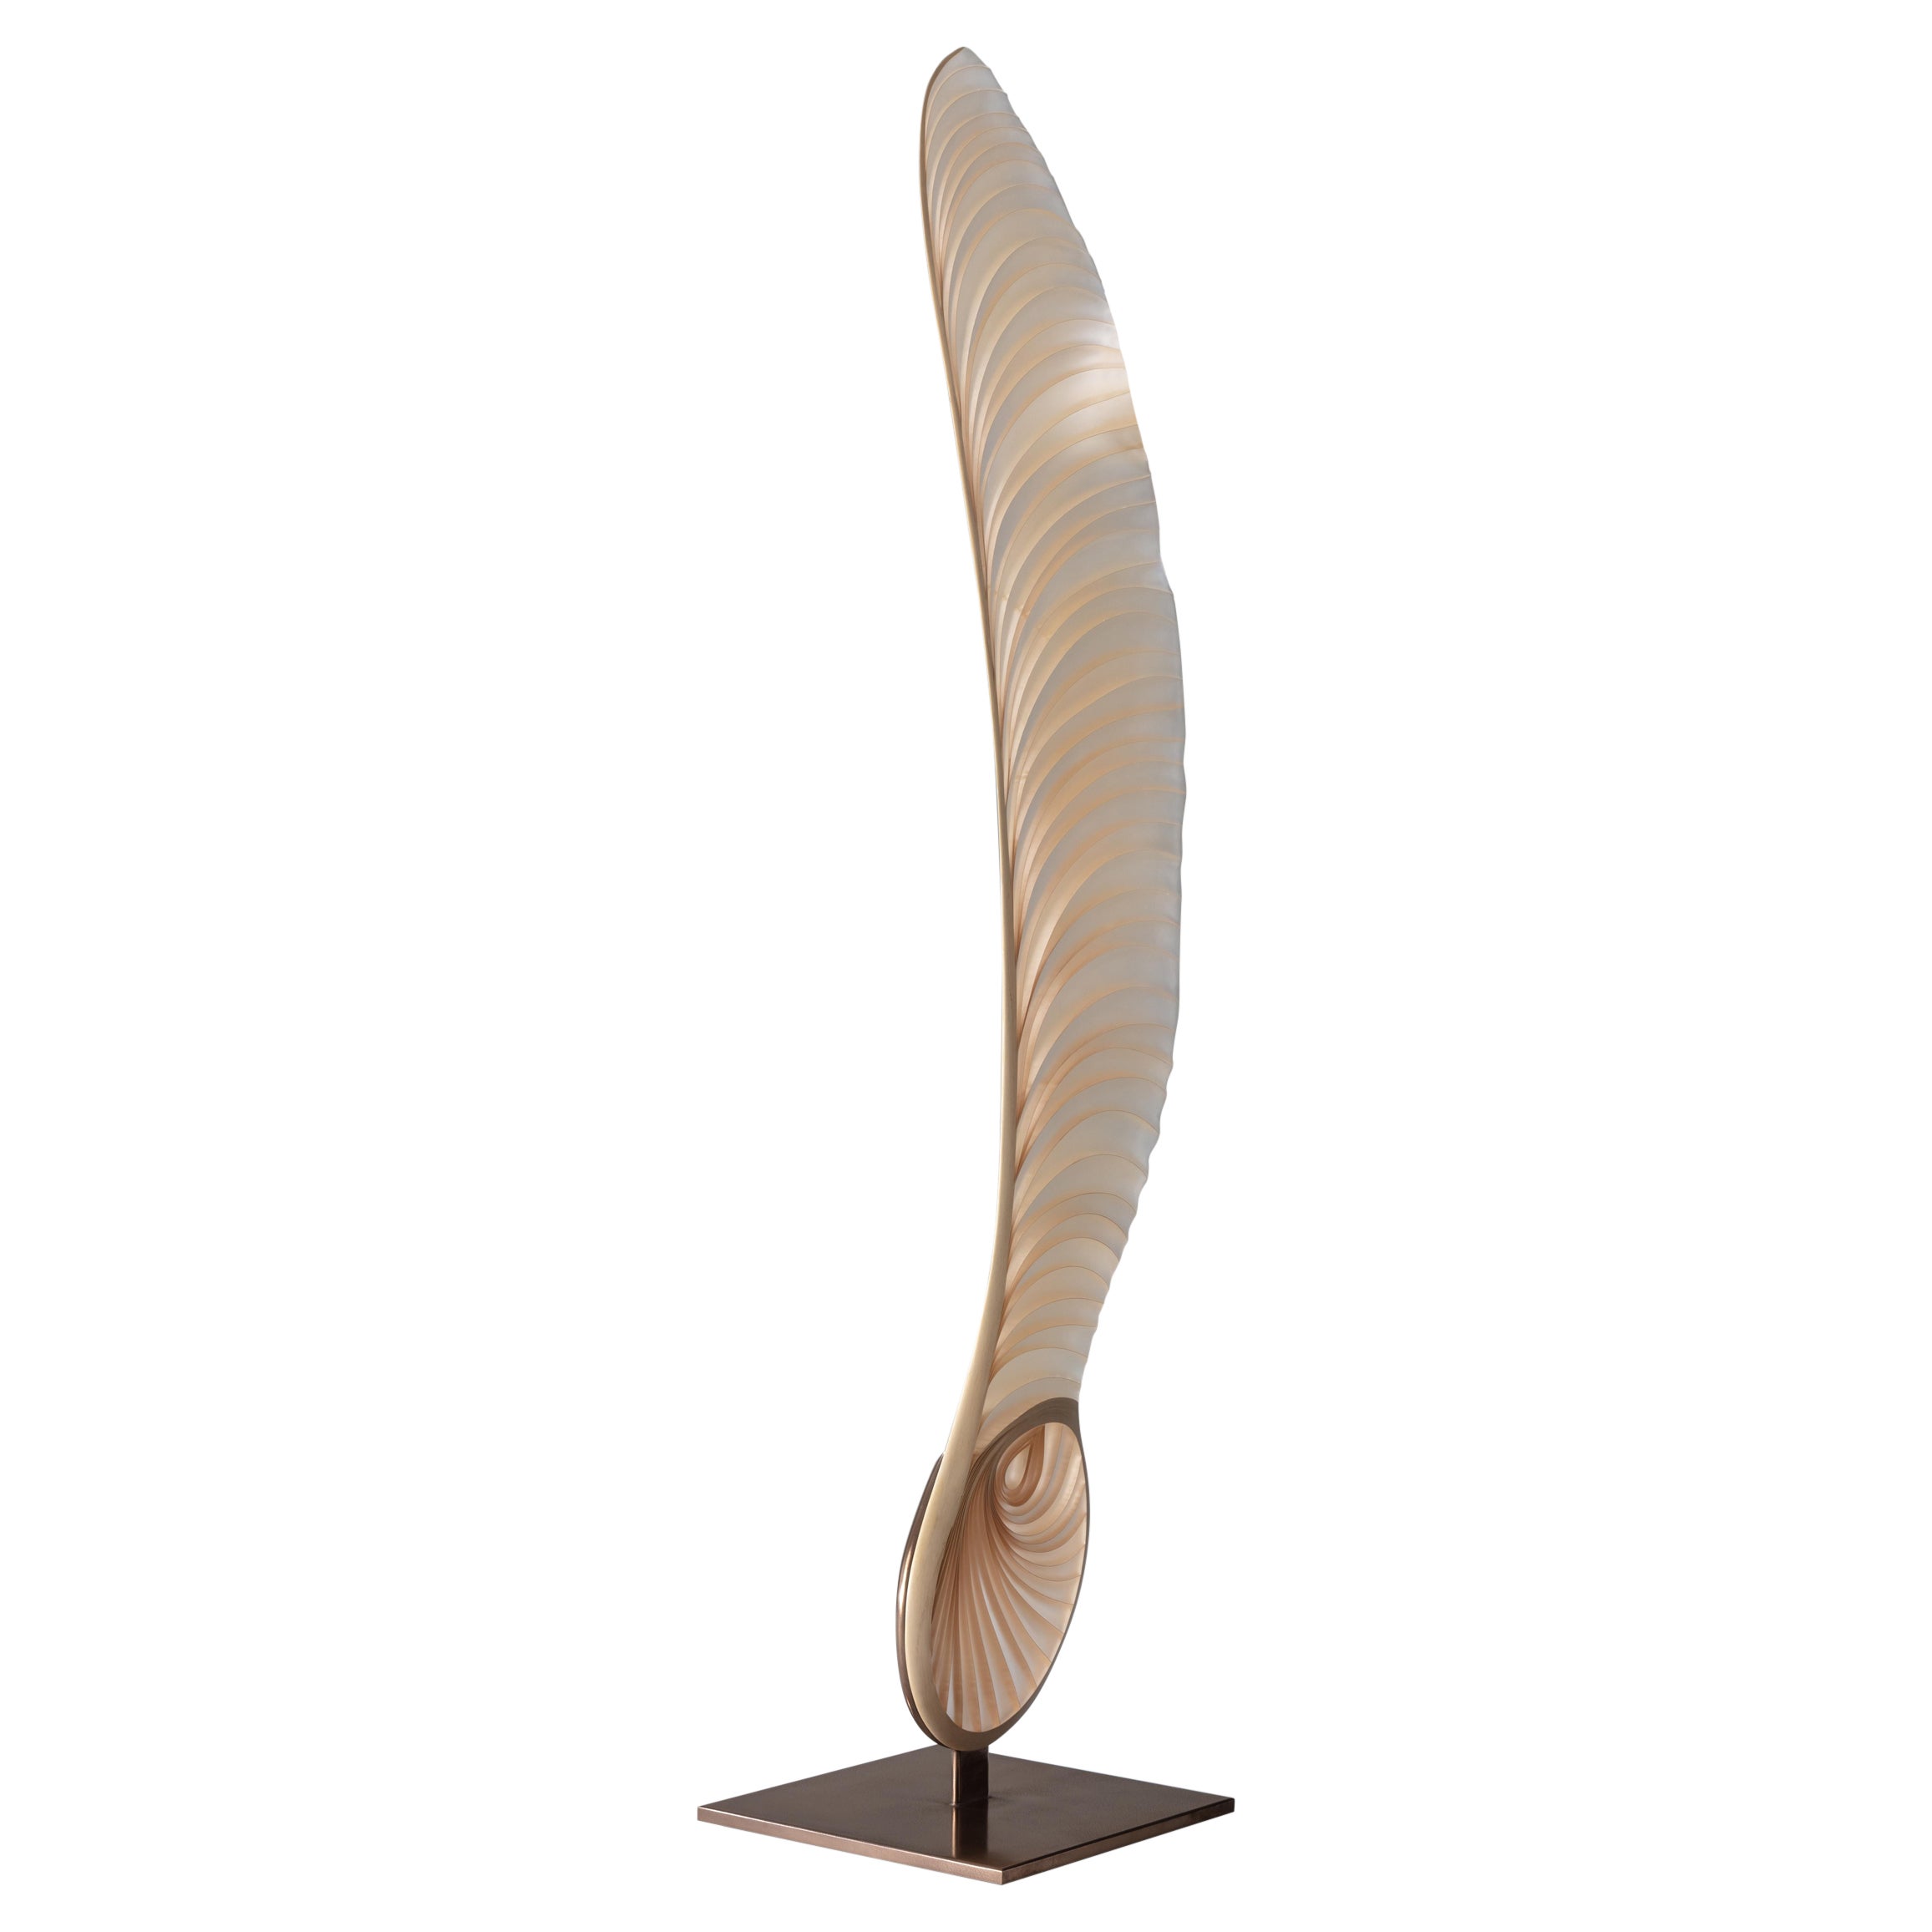 Marc Fish Ethereal Sculptural Sycamore Seed UK 2022, Marc Fisch